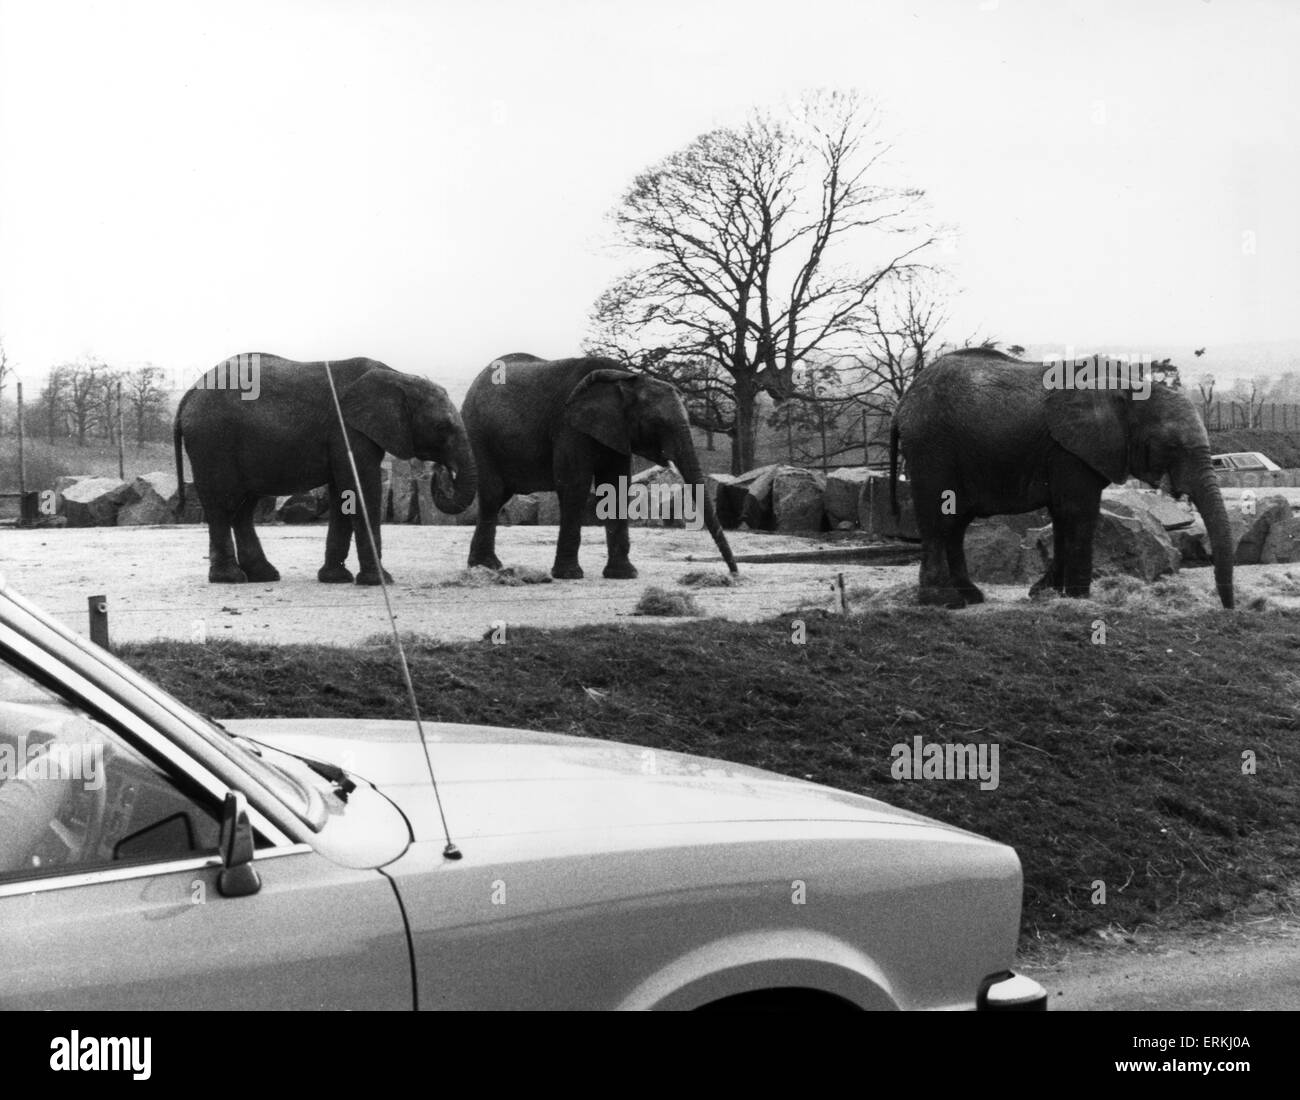 West Midland Safari and Leisure Park, located in Bewdley, Worcestershire, England. African Elephants. 1st May 1980. Stock Photo